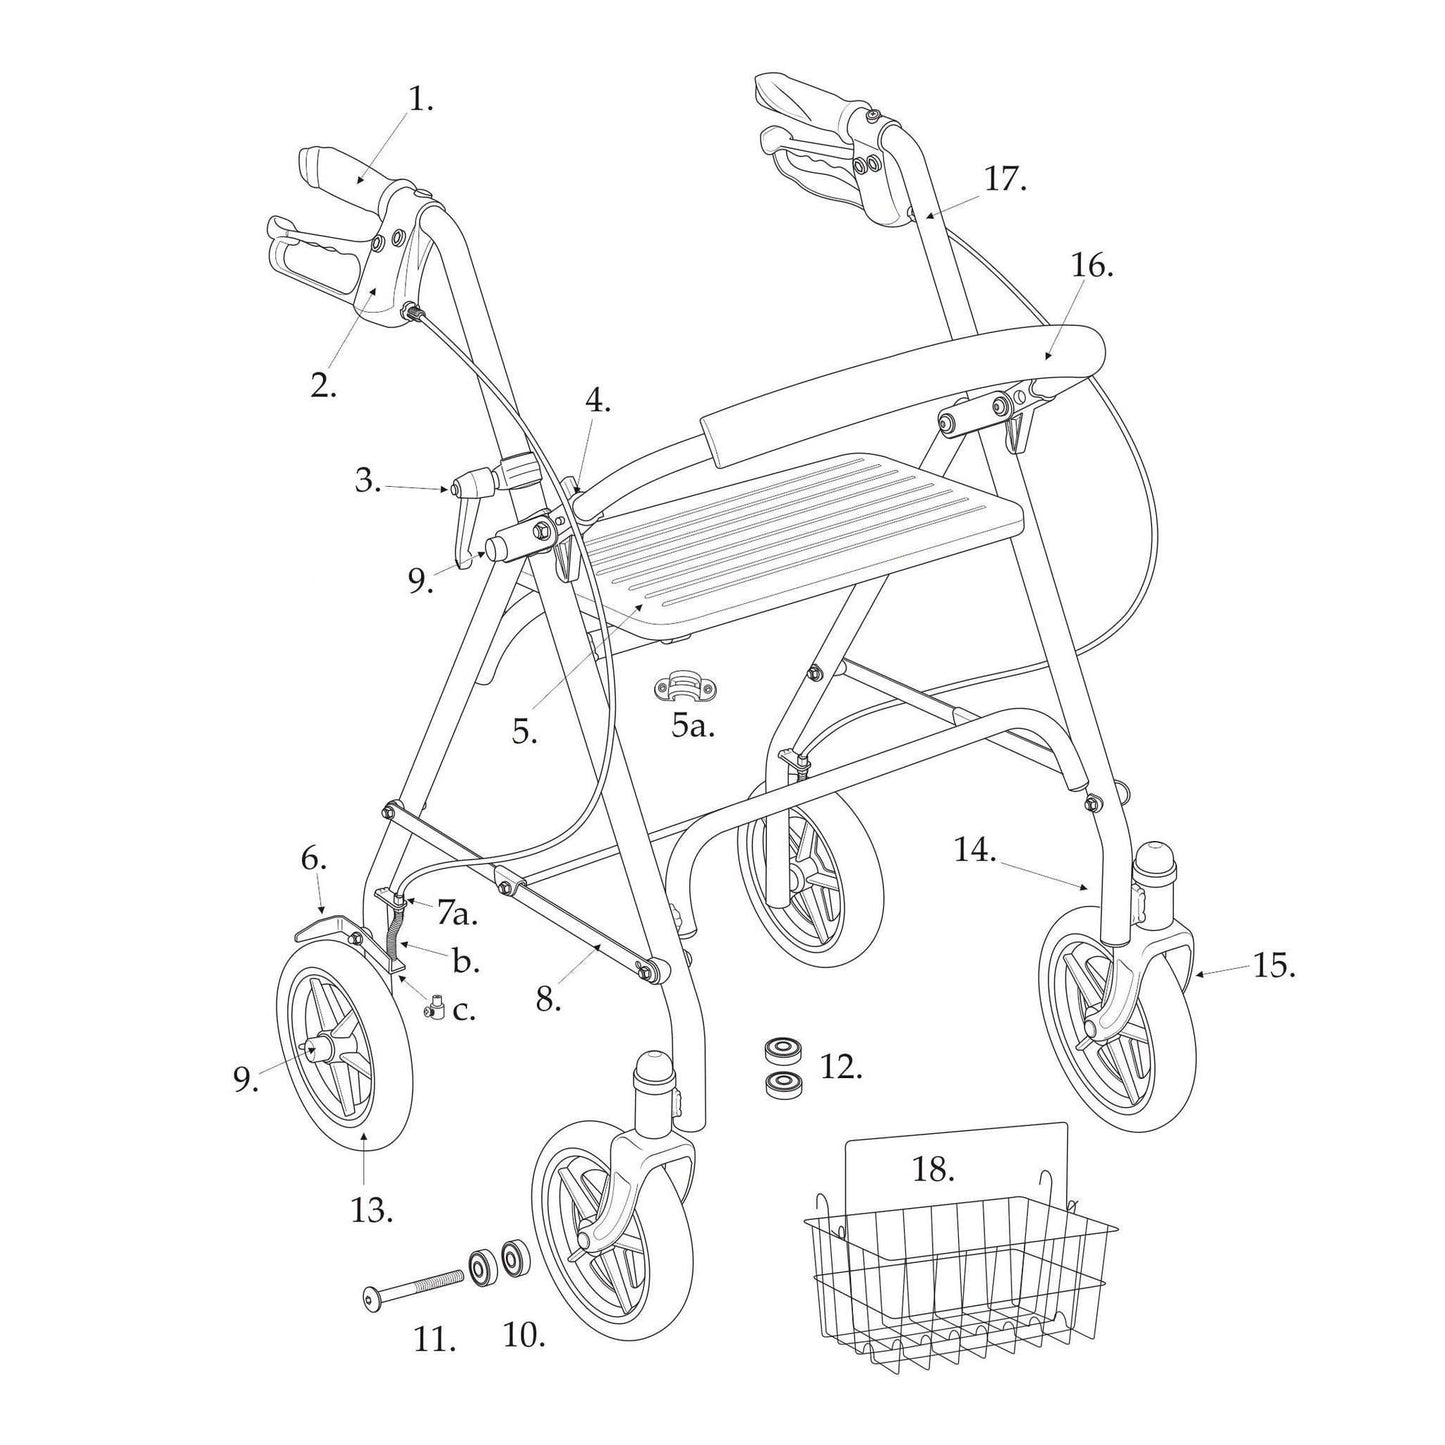 Replacement parts for Drive 10257 series rollator